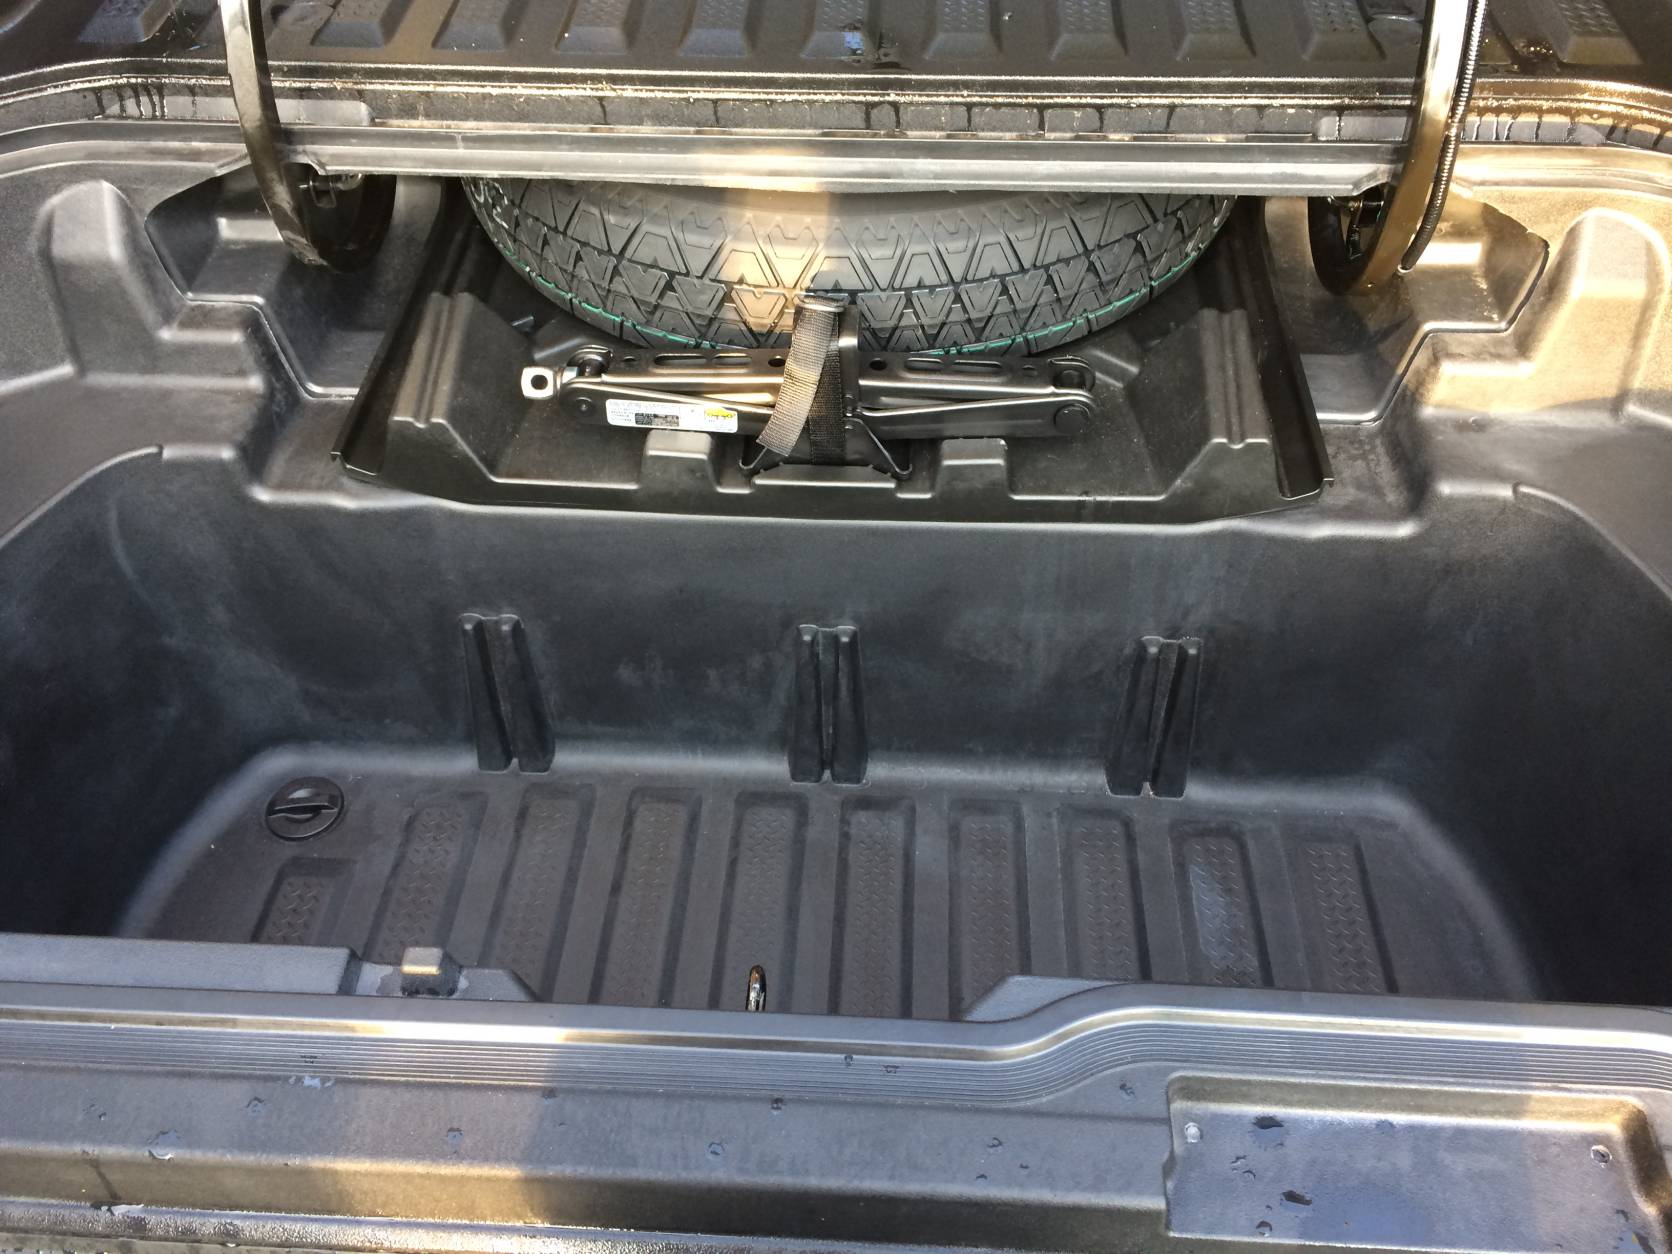 Simply open the door on the floor of the 2017 Honda Ridgeline 2017 and there’s water tight storage and a drain plug so it can be used as a cooler at tailgates.  (WTOP/Mike Parris)